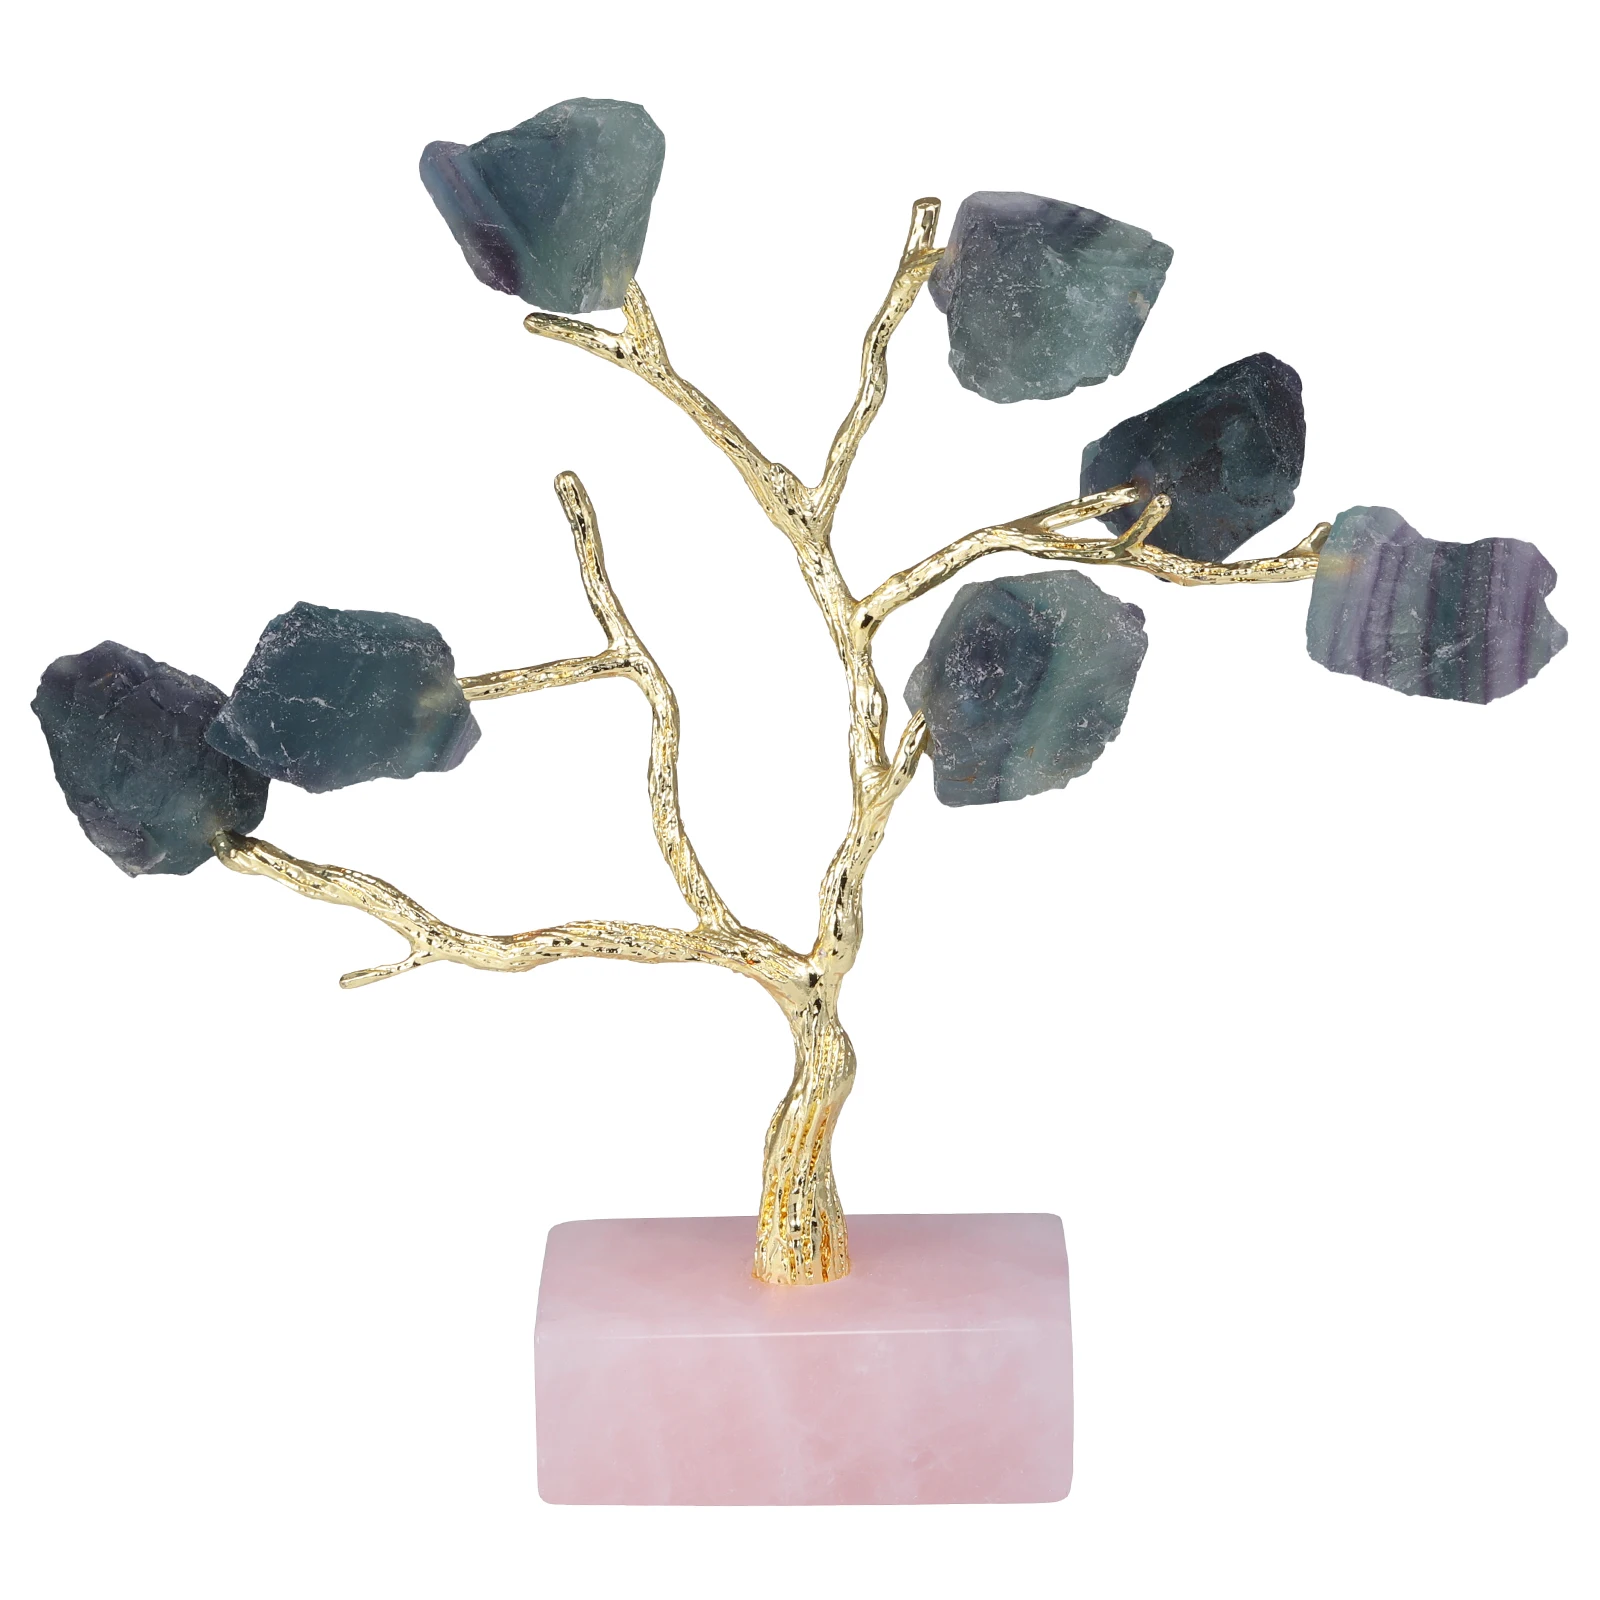 Natural Rough Crystal Stone Tree With Rose Quartz Base Healing Gemstone Golden Tree For Jewelry Organizer Home Table Decoration tumbeelluwa natural rough rose quartz candlestick irregular candle holder potted plants table decoration home decor ornaments